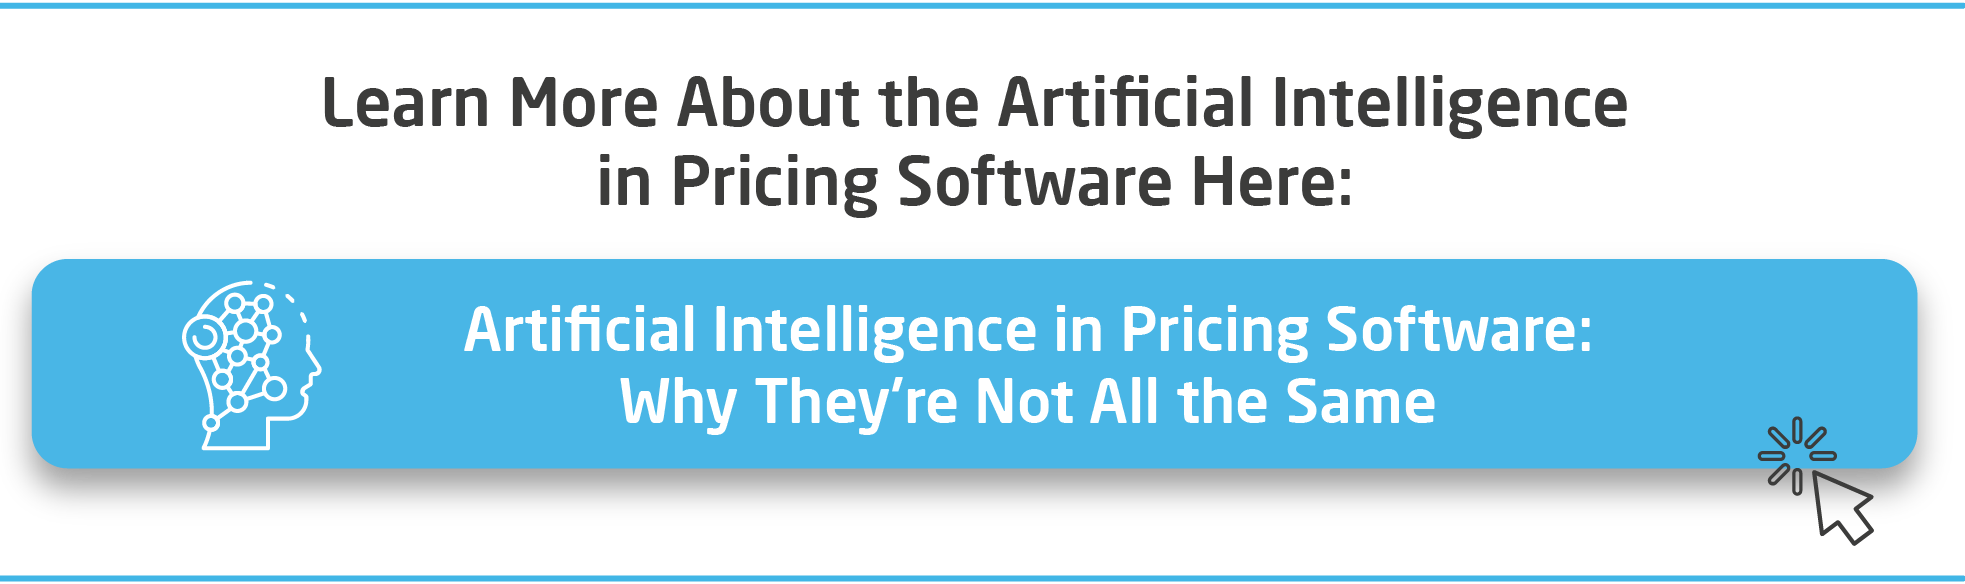 CTA_InArticle_artificial-intelligence-in-pricing-software-why-they-are-not-all-the-same_654-x-194